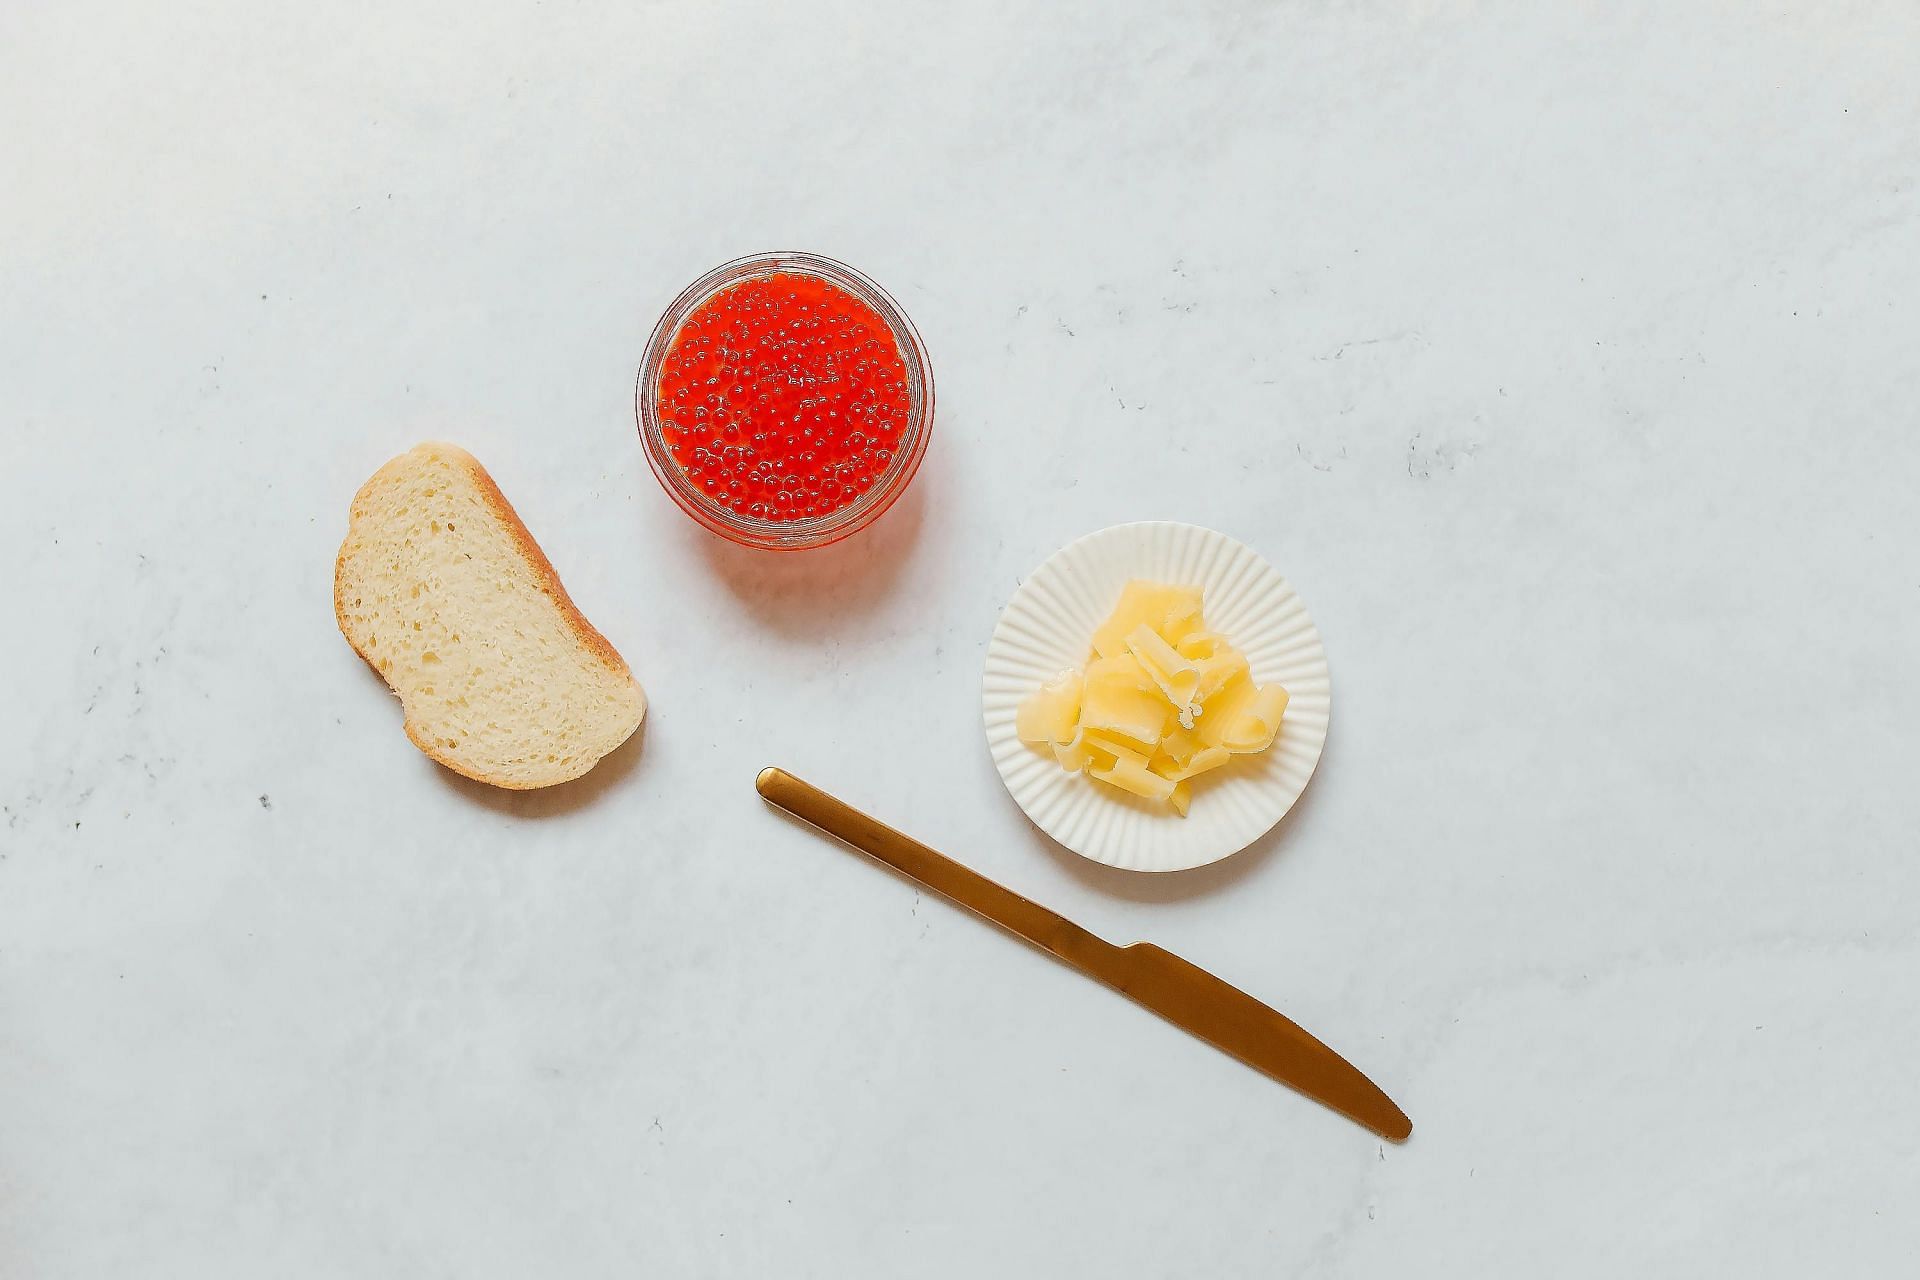 best butter alternatives (image sourced via Pexels / Photo by polina)